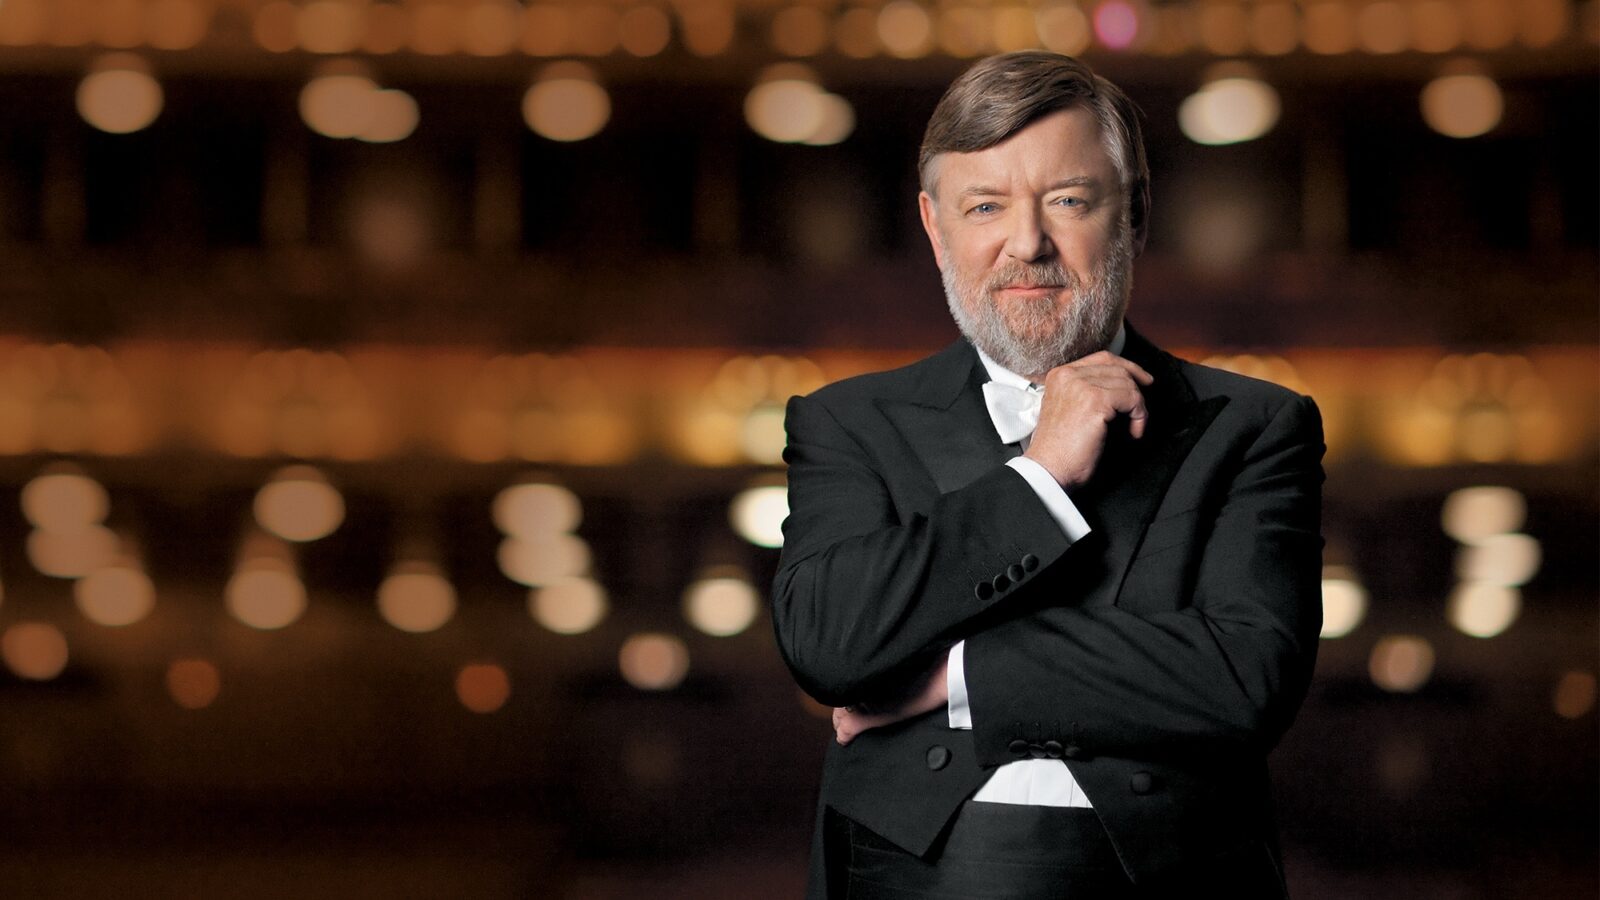 Featured image for “Conductor Andrew Davis, who headed Lyric Opera of Chicago and orchestras on 3 continents, dies”